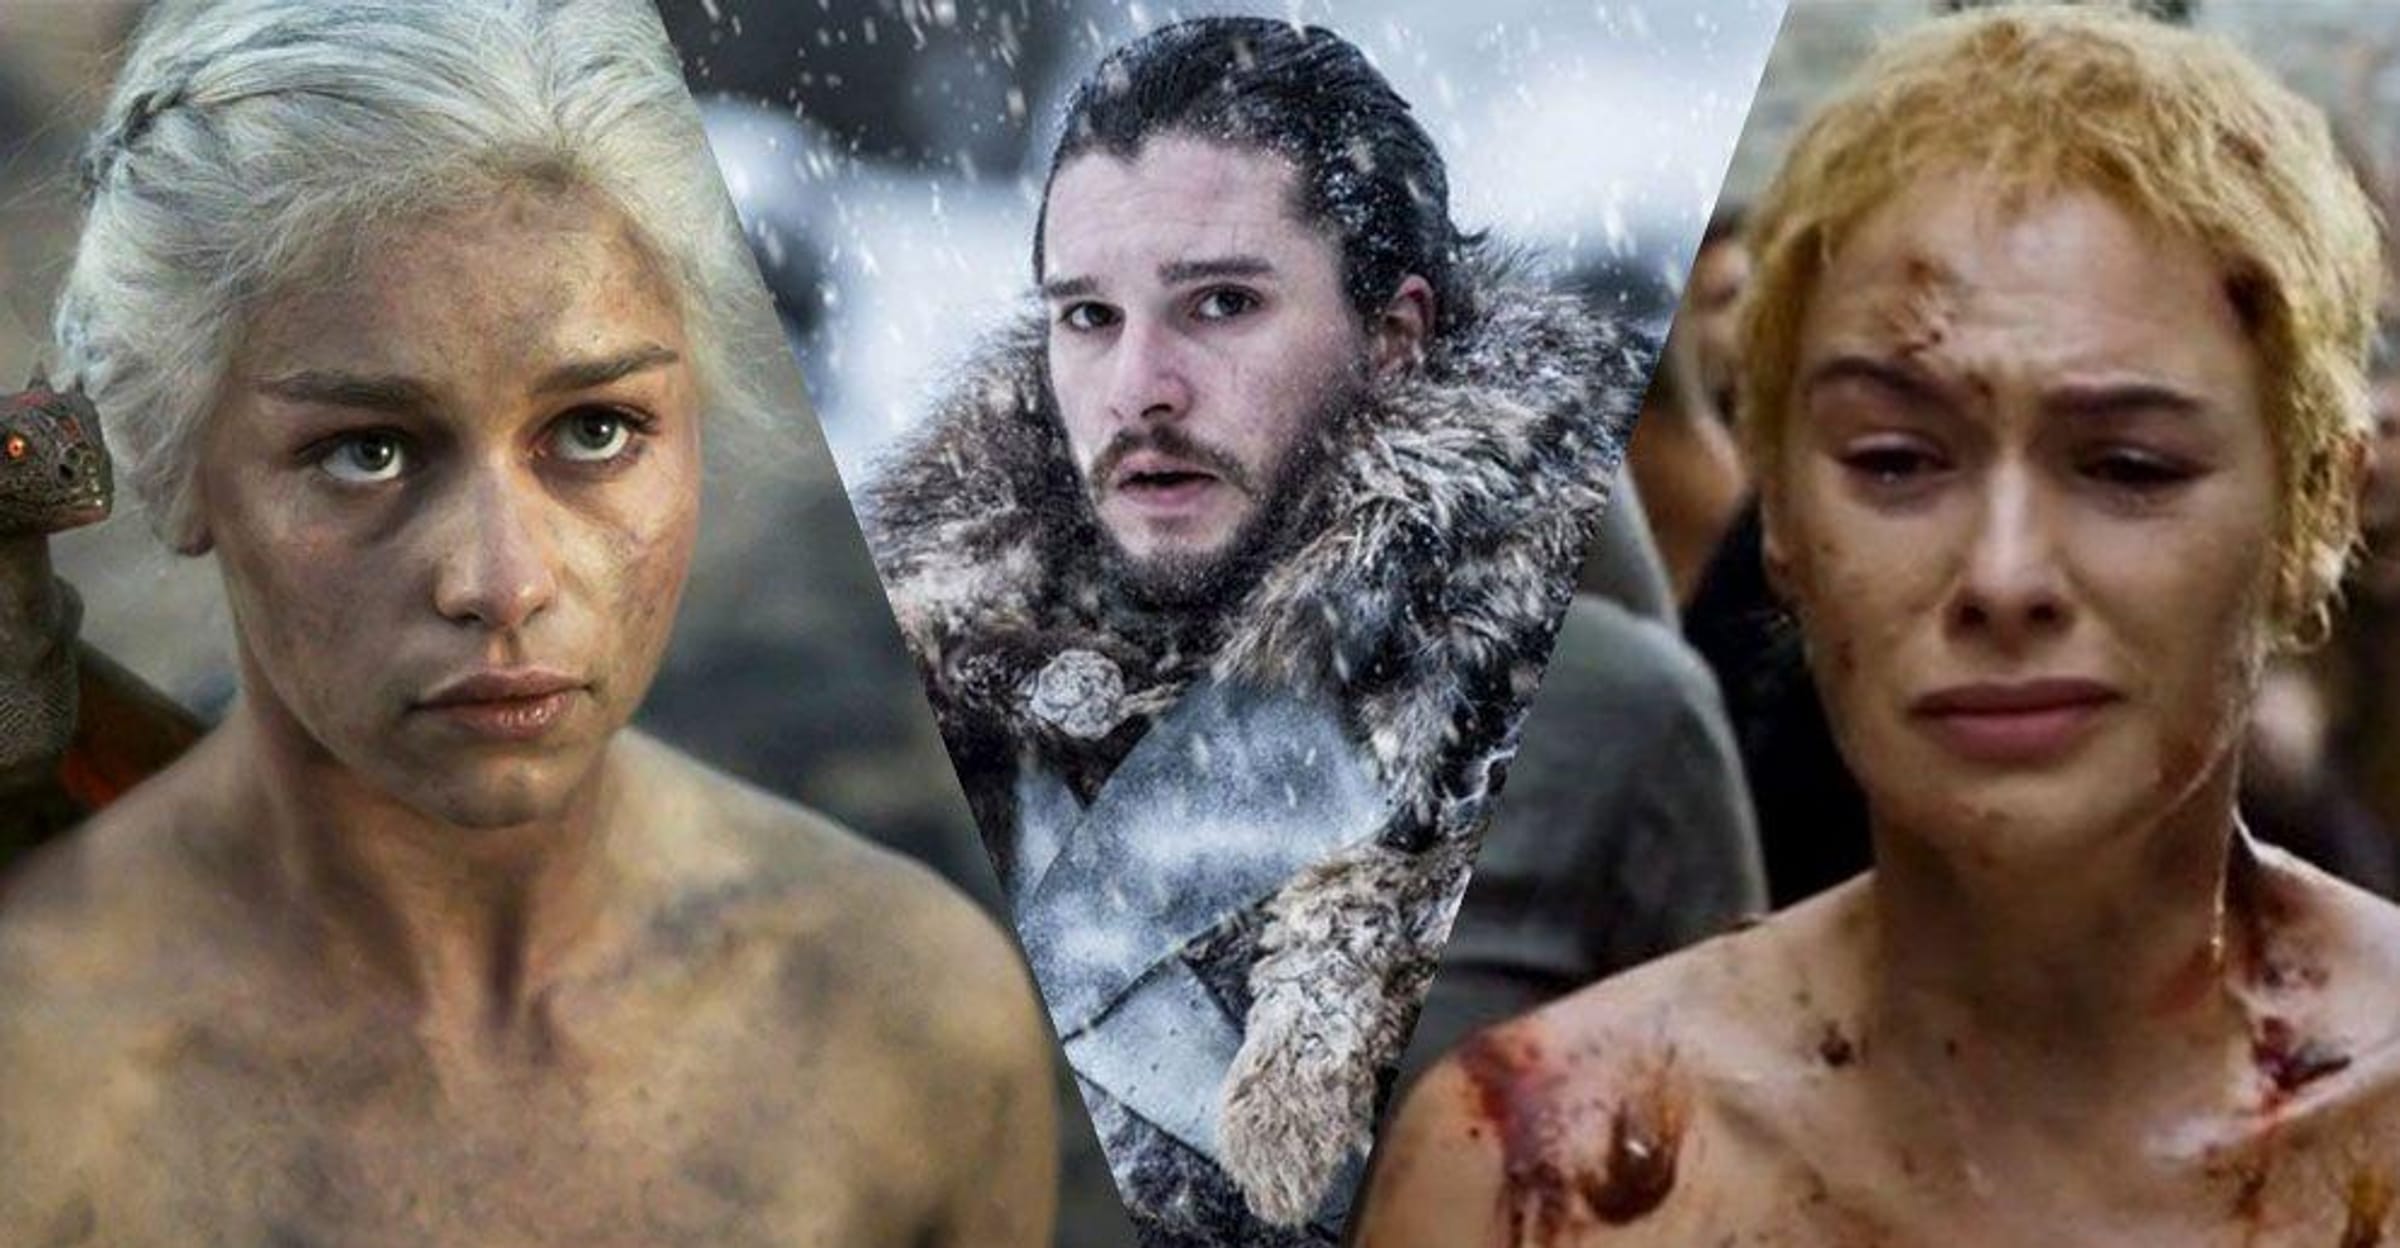 Game of Thrones: Every episode ranked from worst to best, from